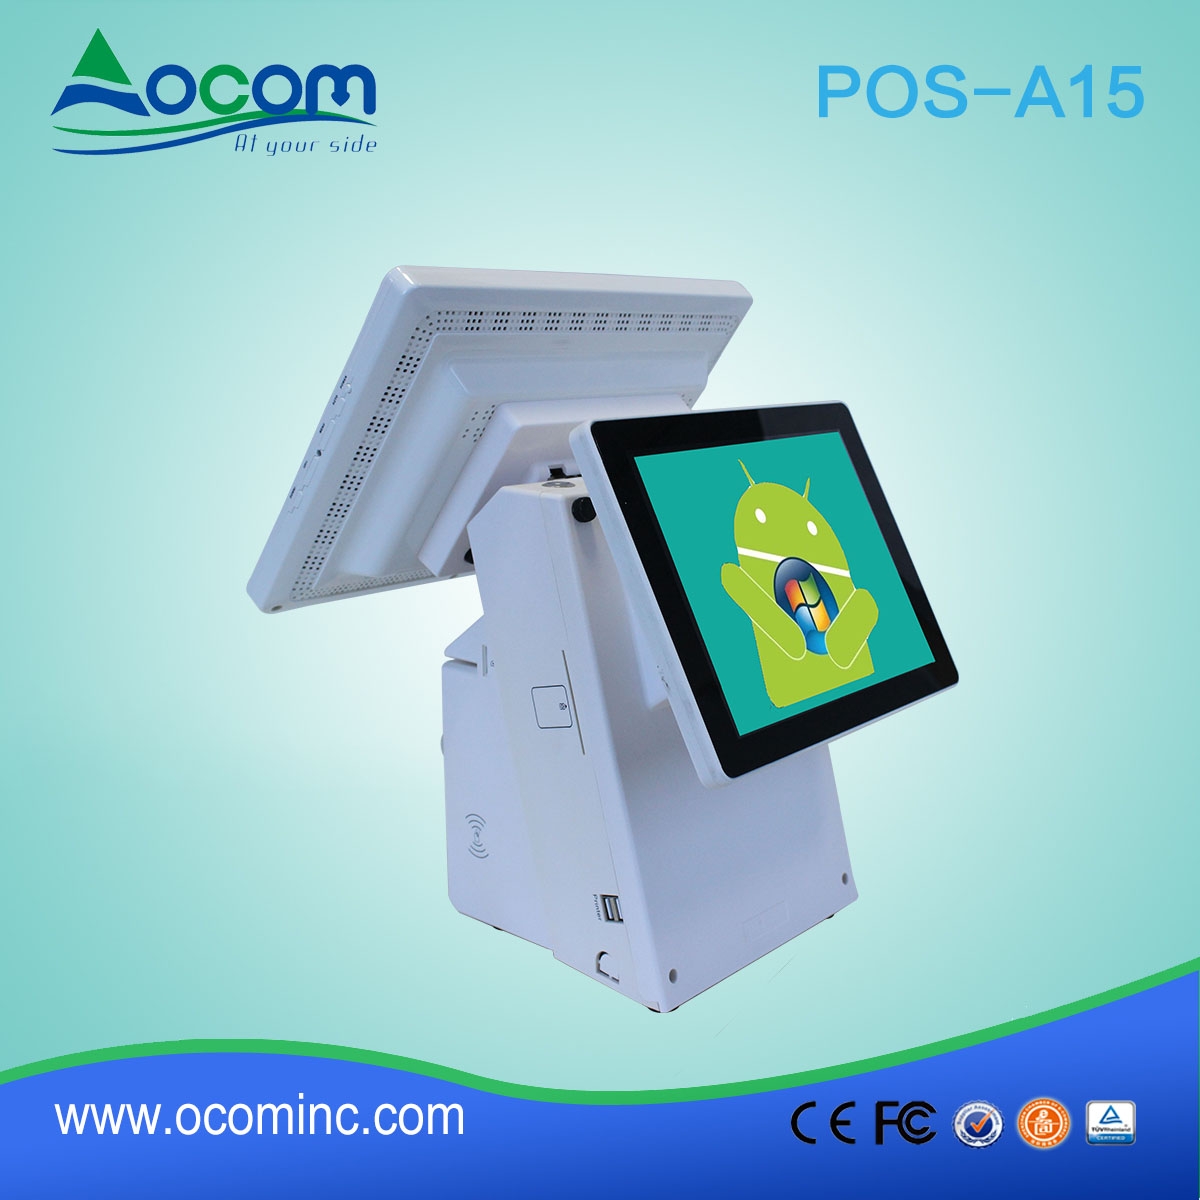 (POS-A15) All-in-one Touch Screen POS Terminal met thermische Printer